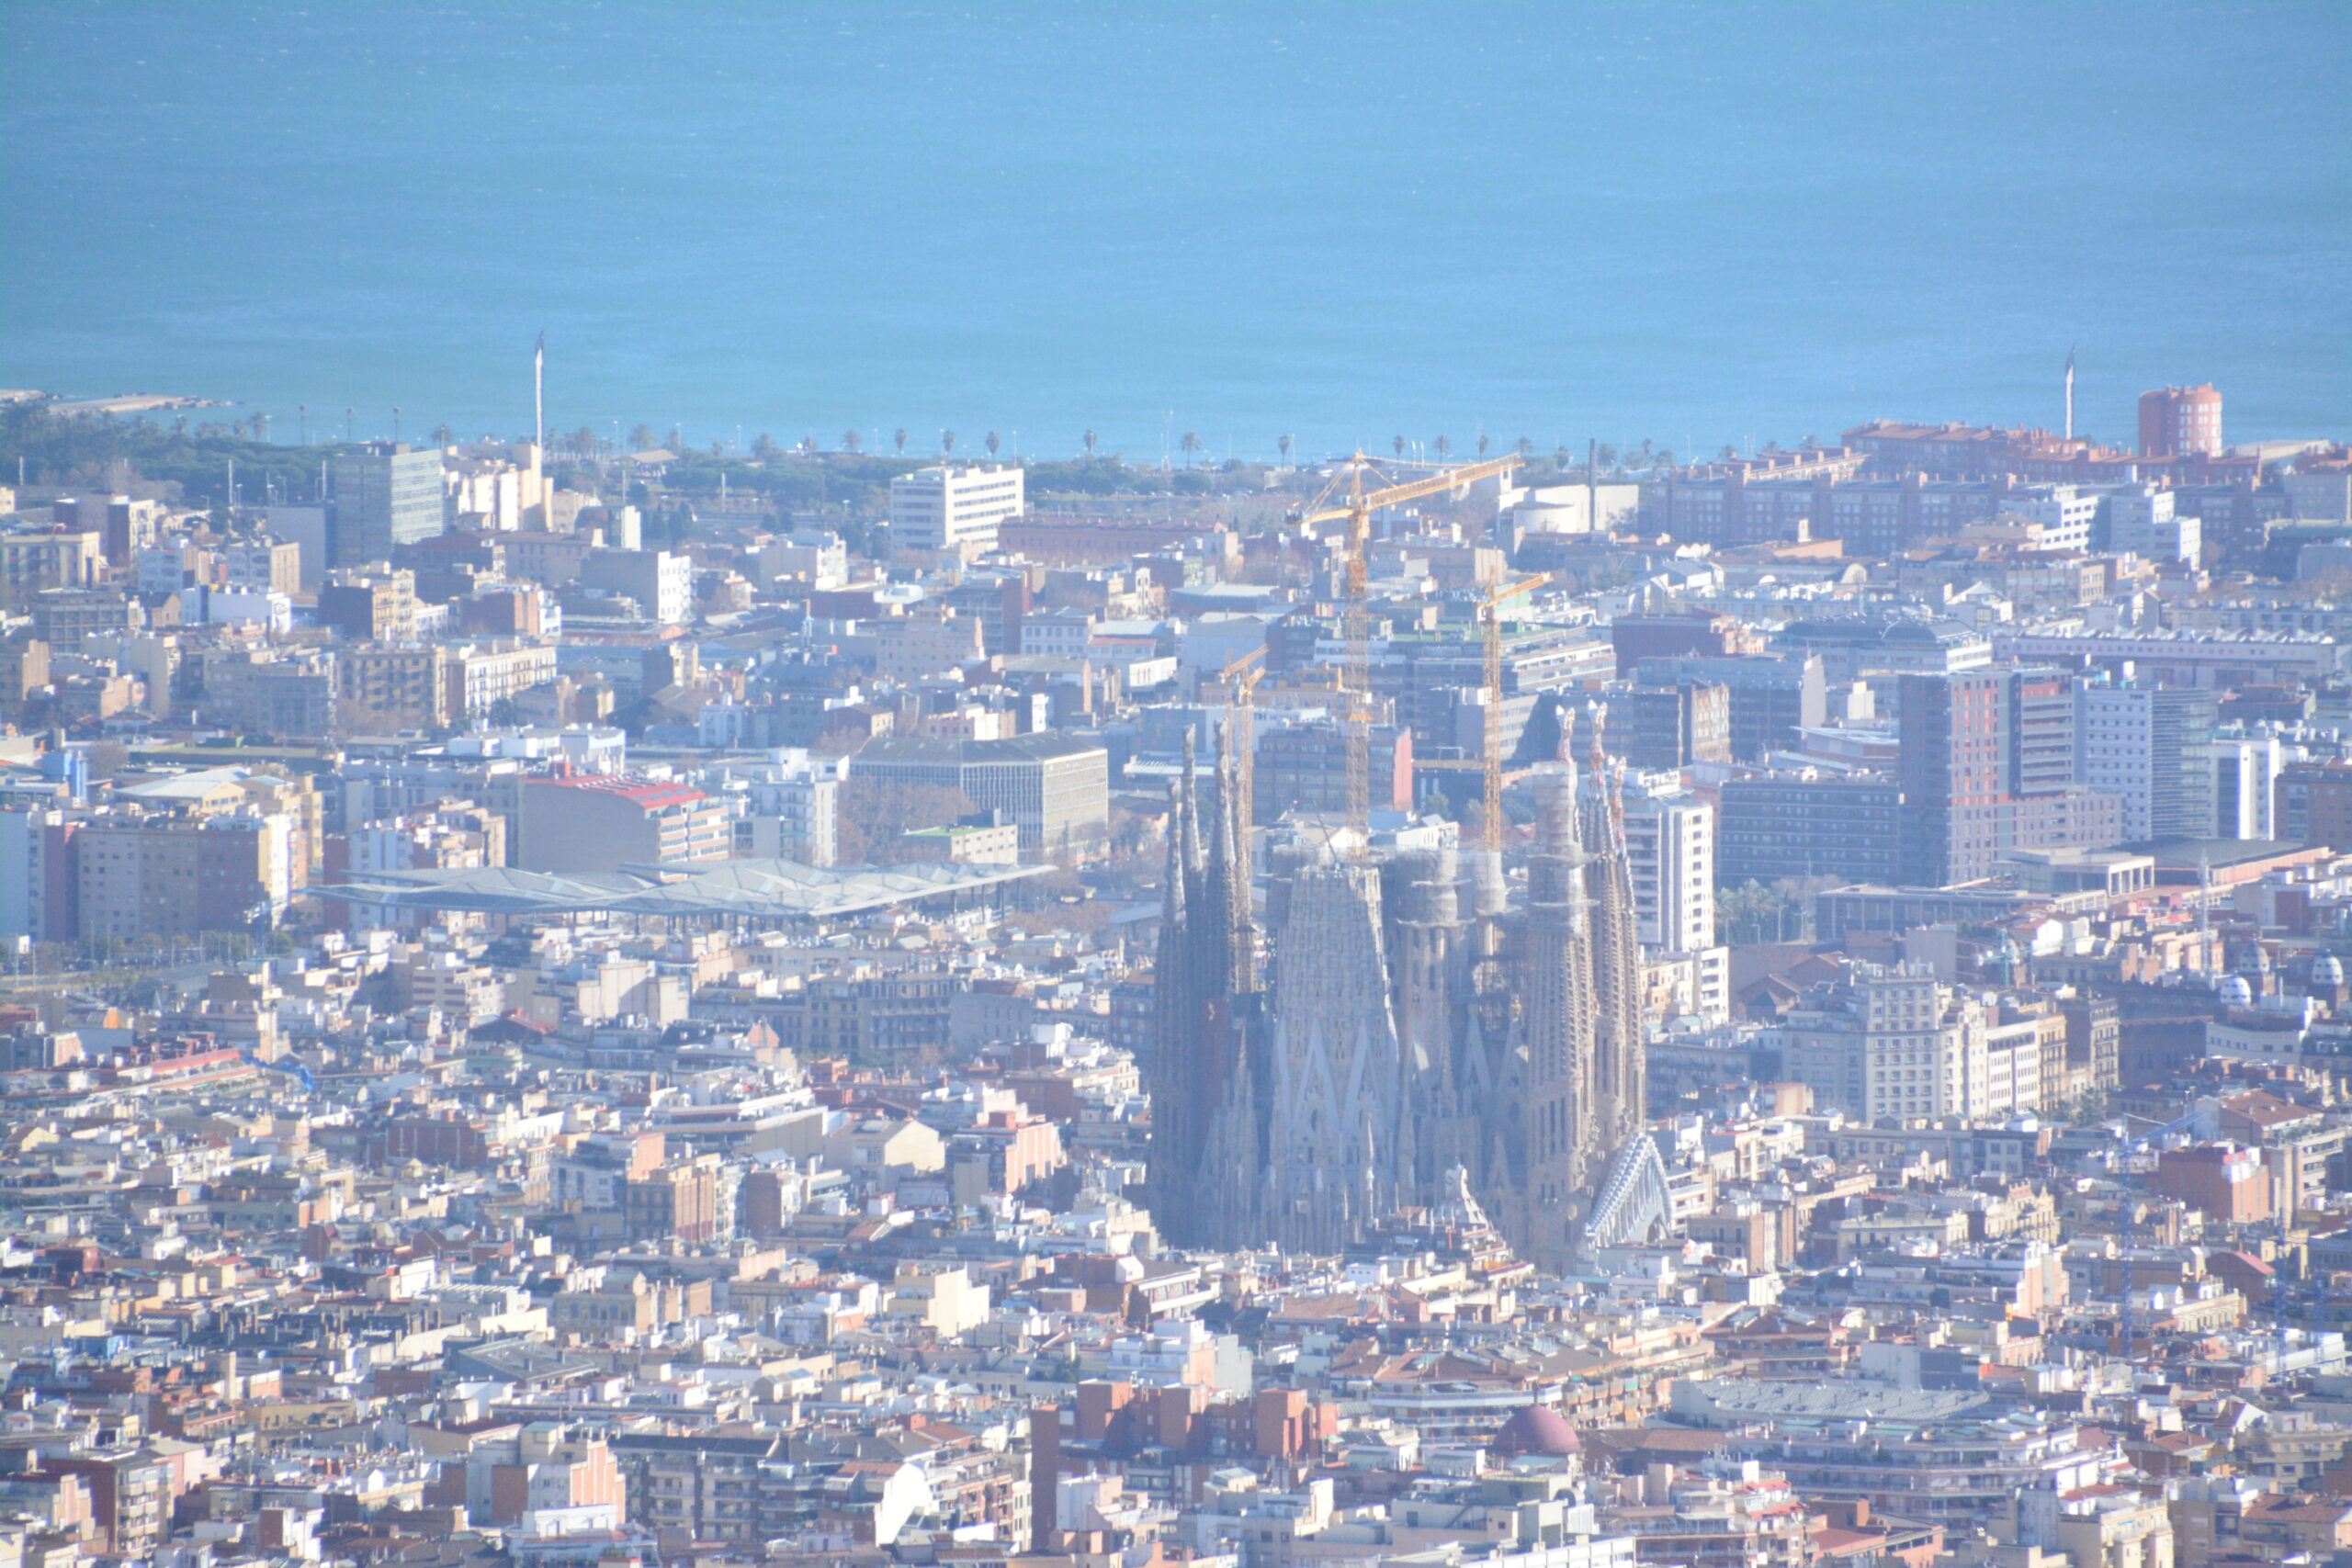 The view from Tibidabo